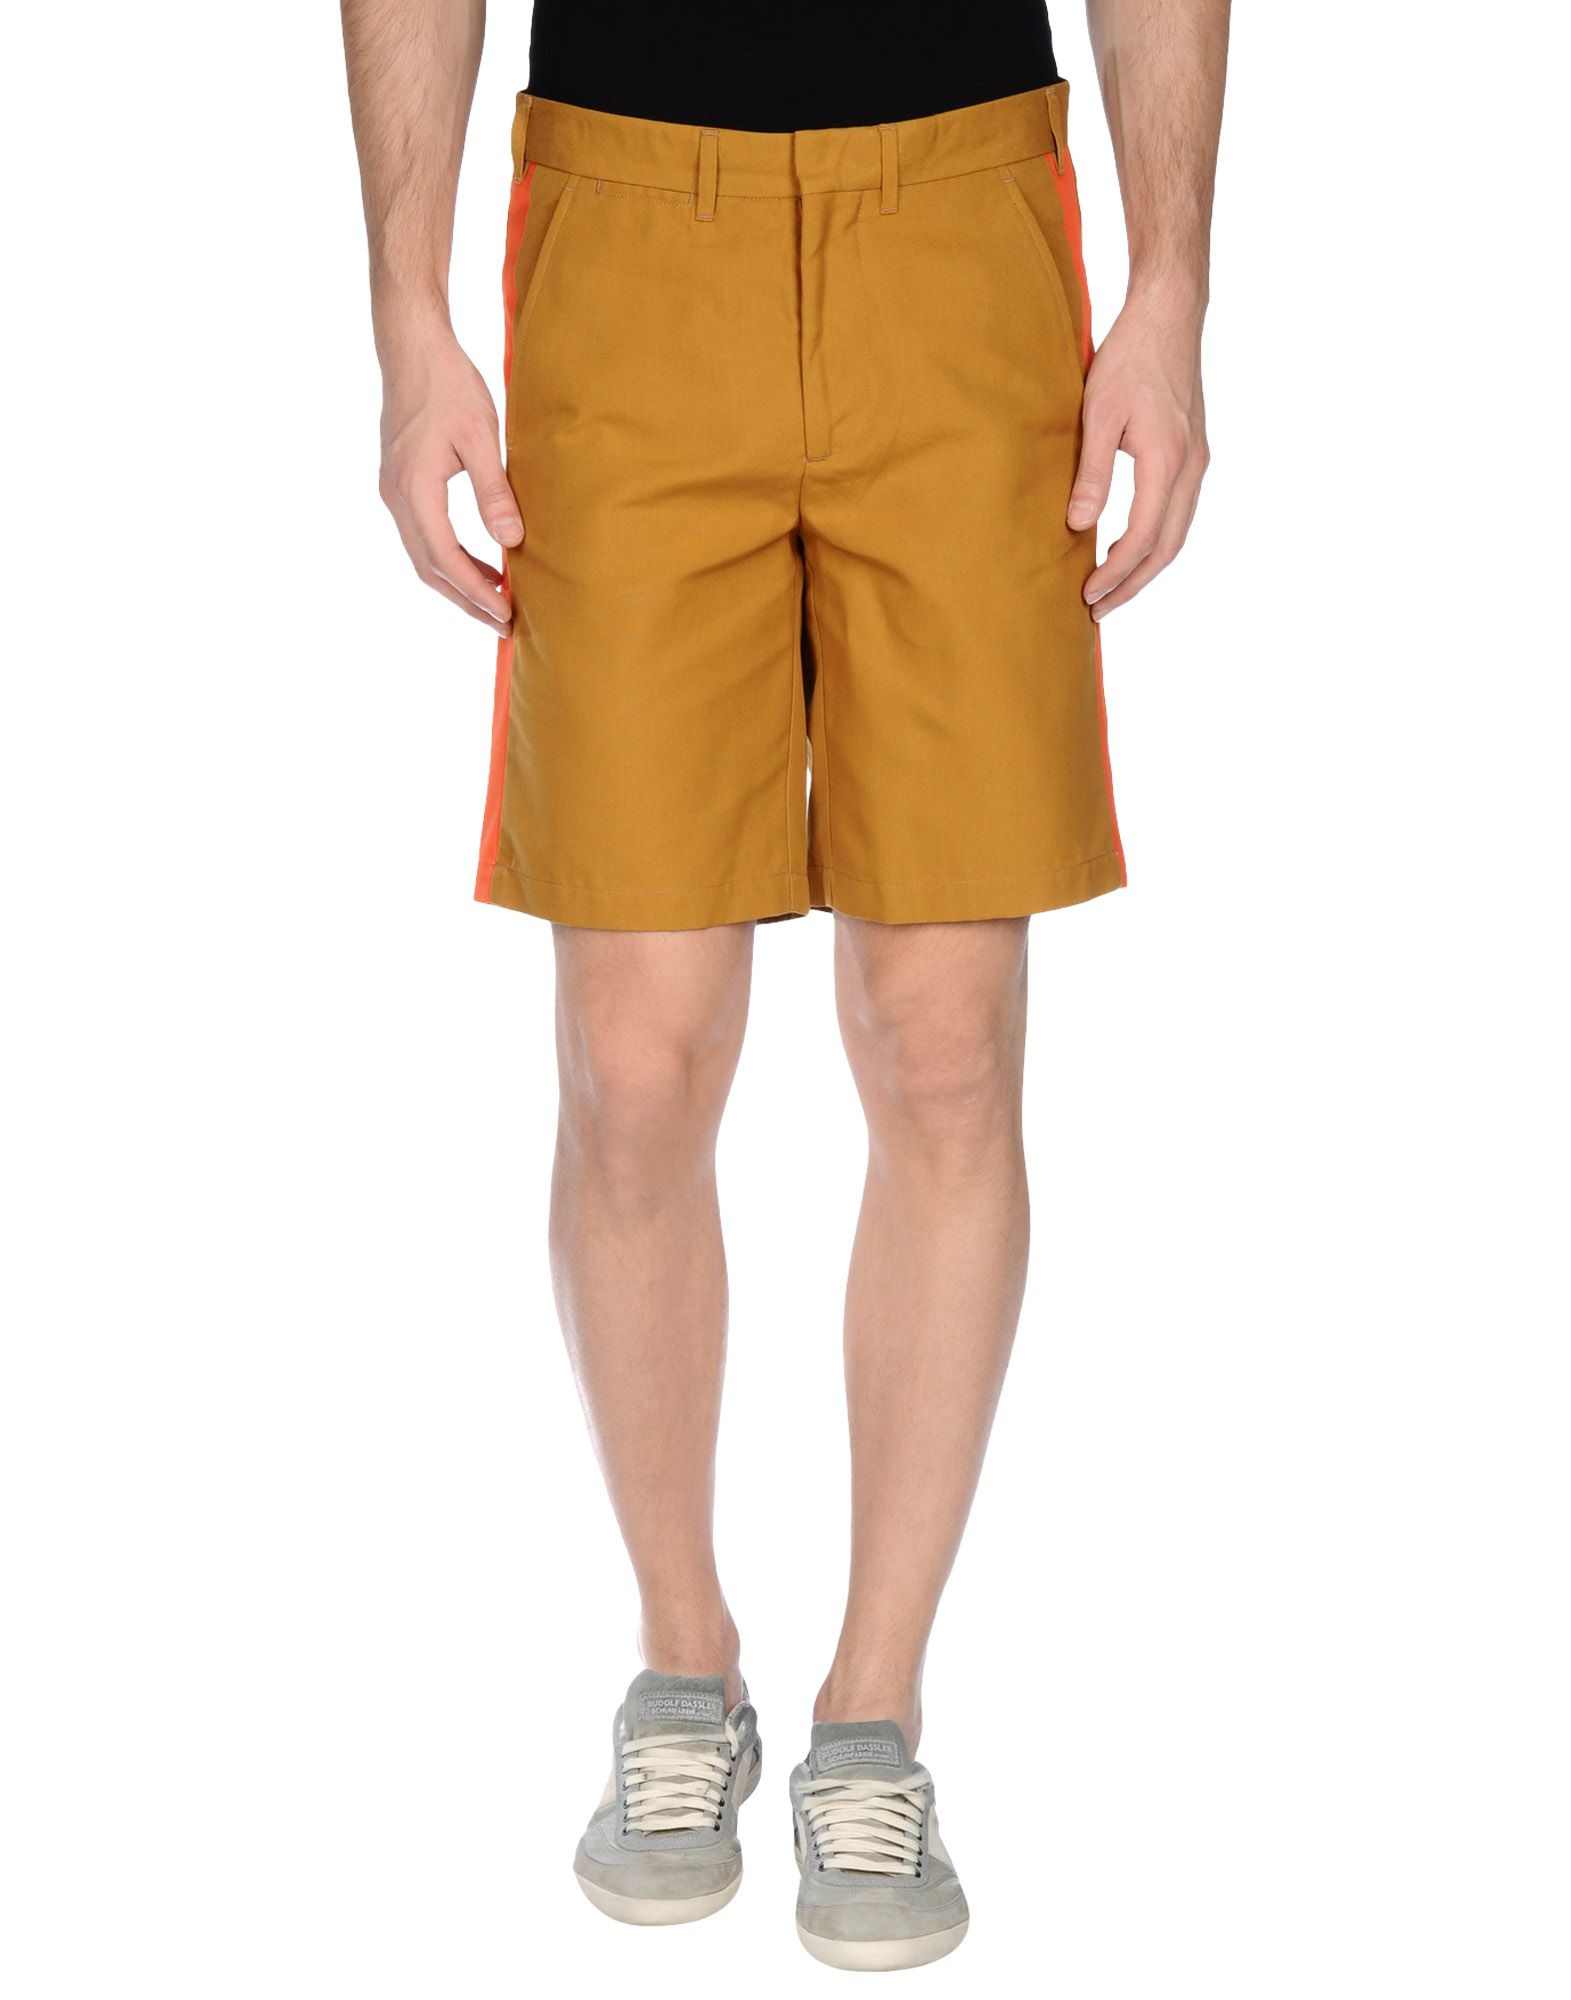 Lyst - Msgm Bermuda Shorts in Natural for Men